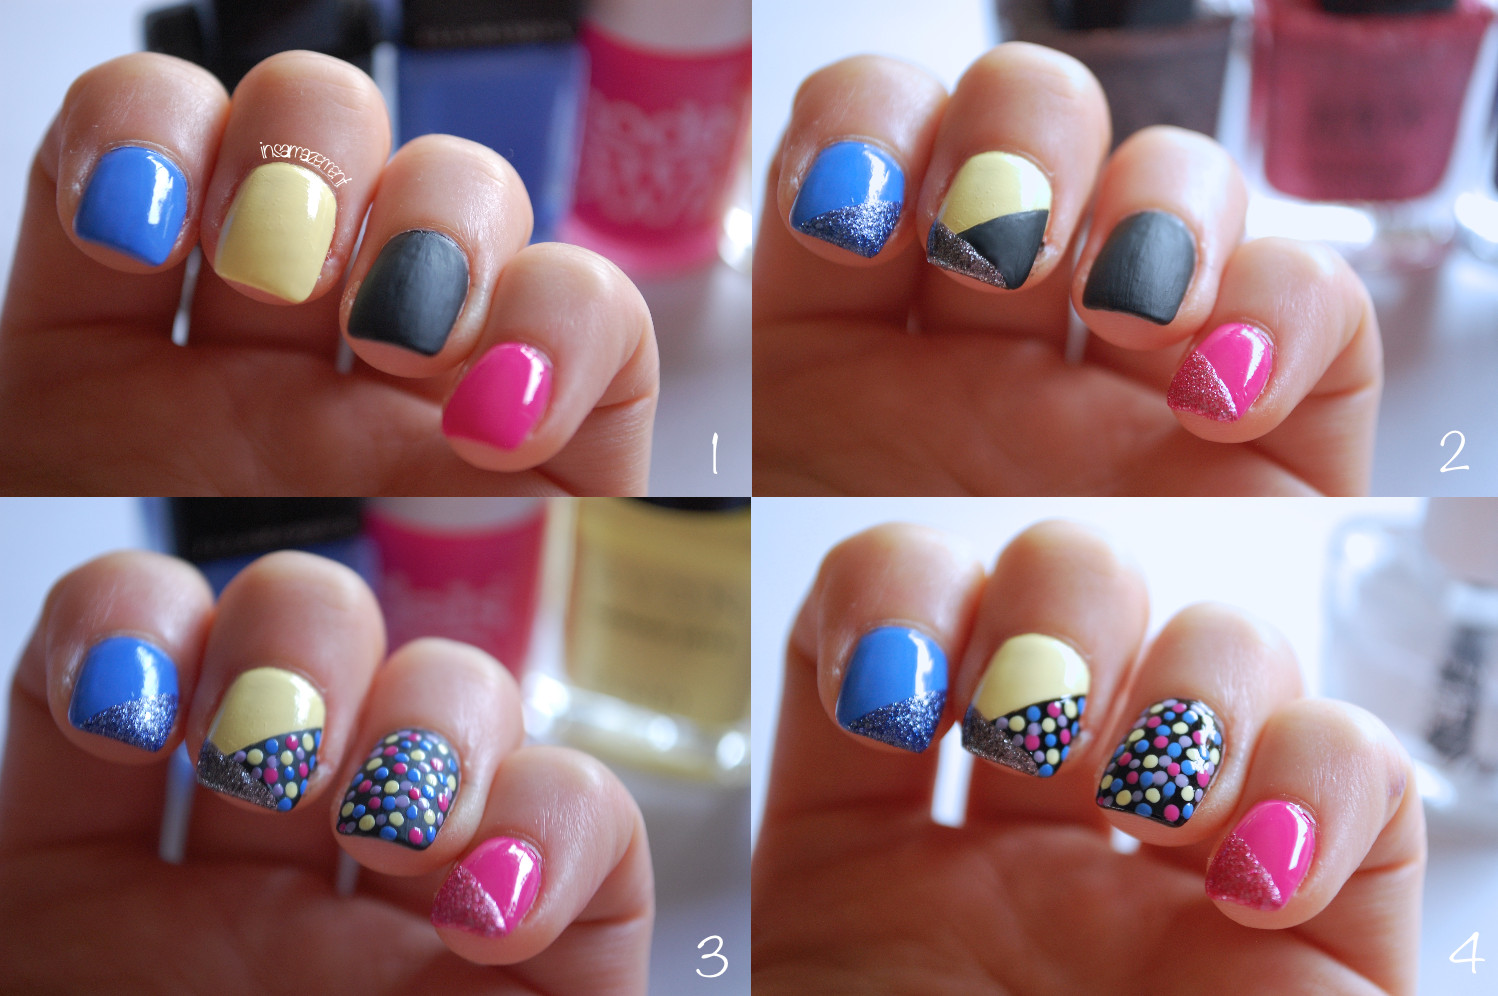 4. Dot Work Nail Art Tutorial for Perfect Dots - wide 7